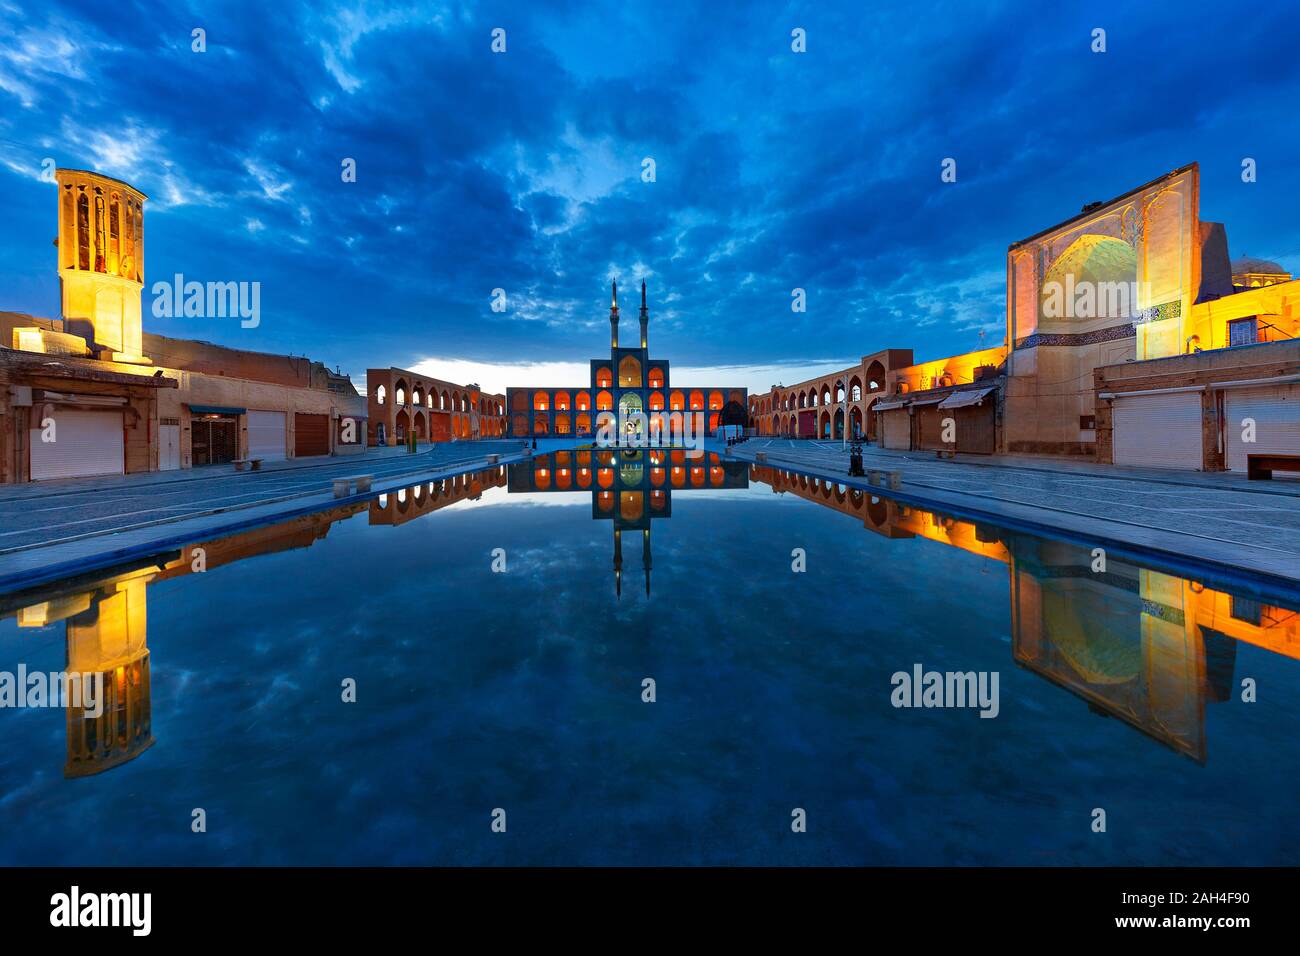 Amir Chakhmaq Mosque and its reflection in the pool, at the twilight, in Yazd, Iran Stock Photo